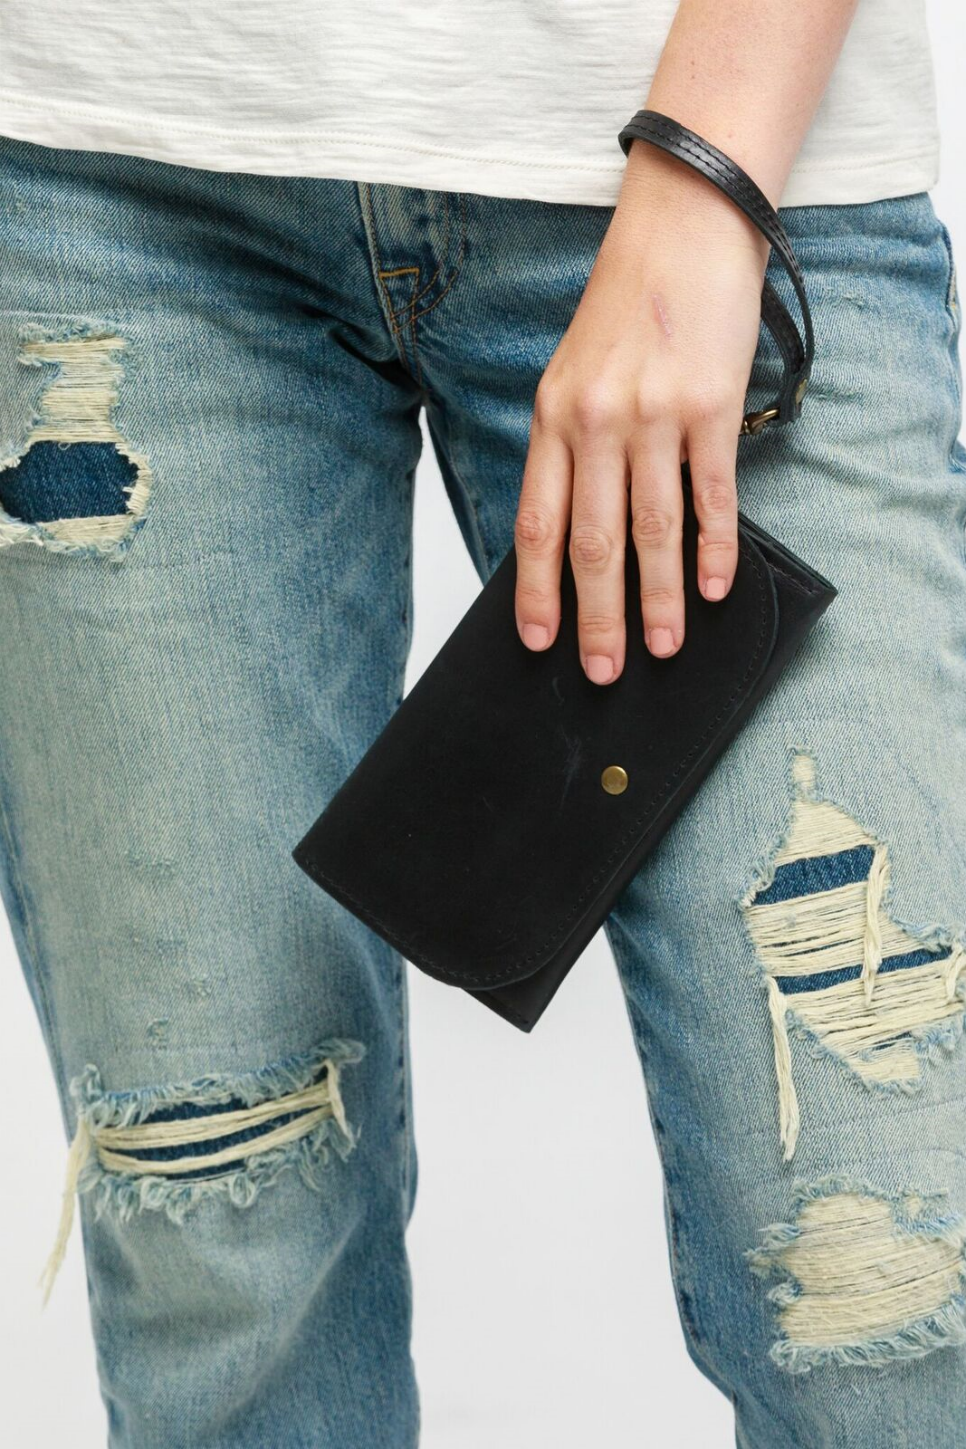 Able - Mare Phone Wallet - Black - Model